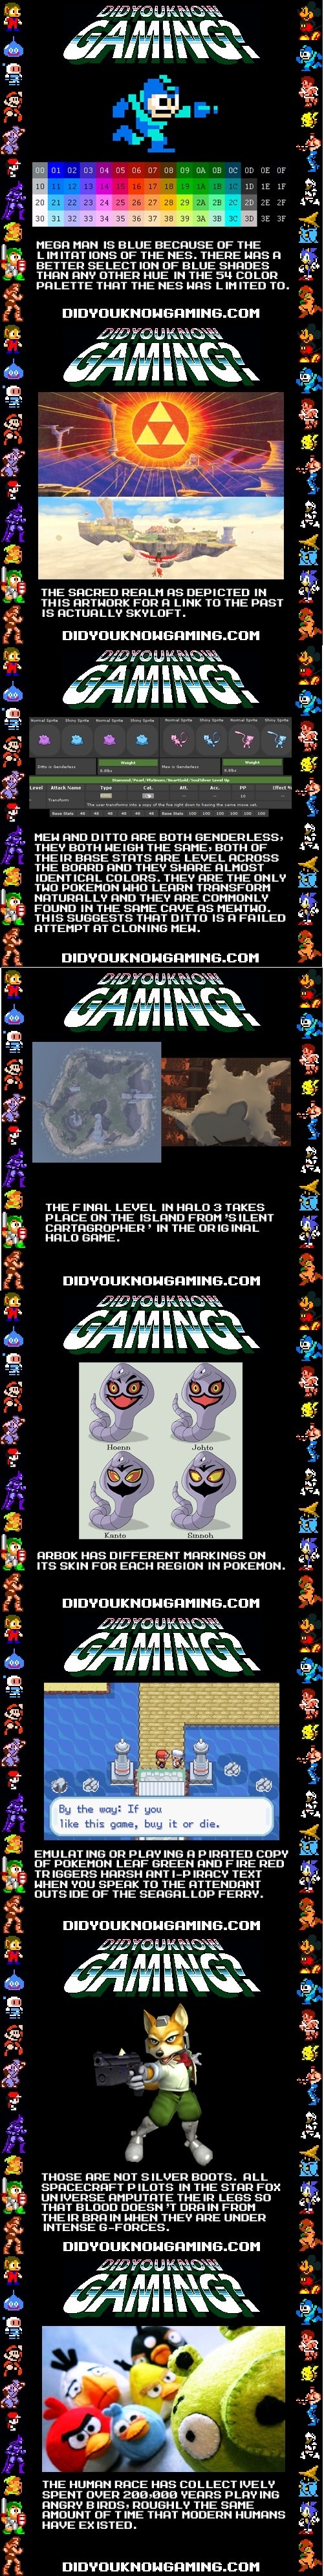 Interesting game facts